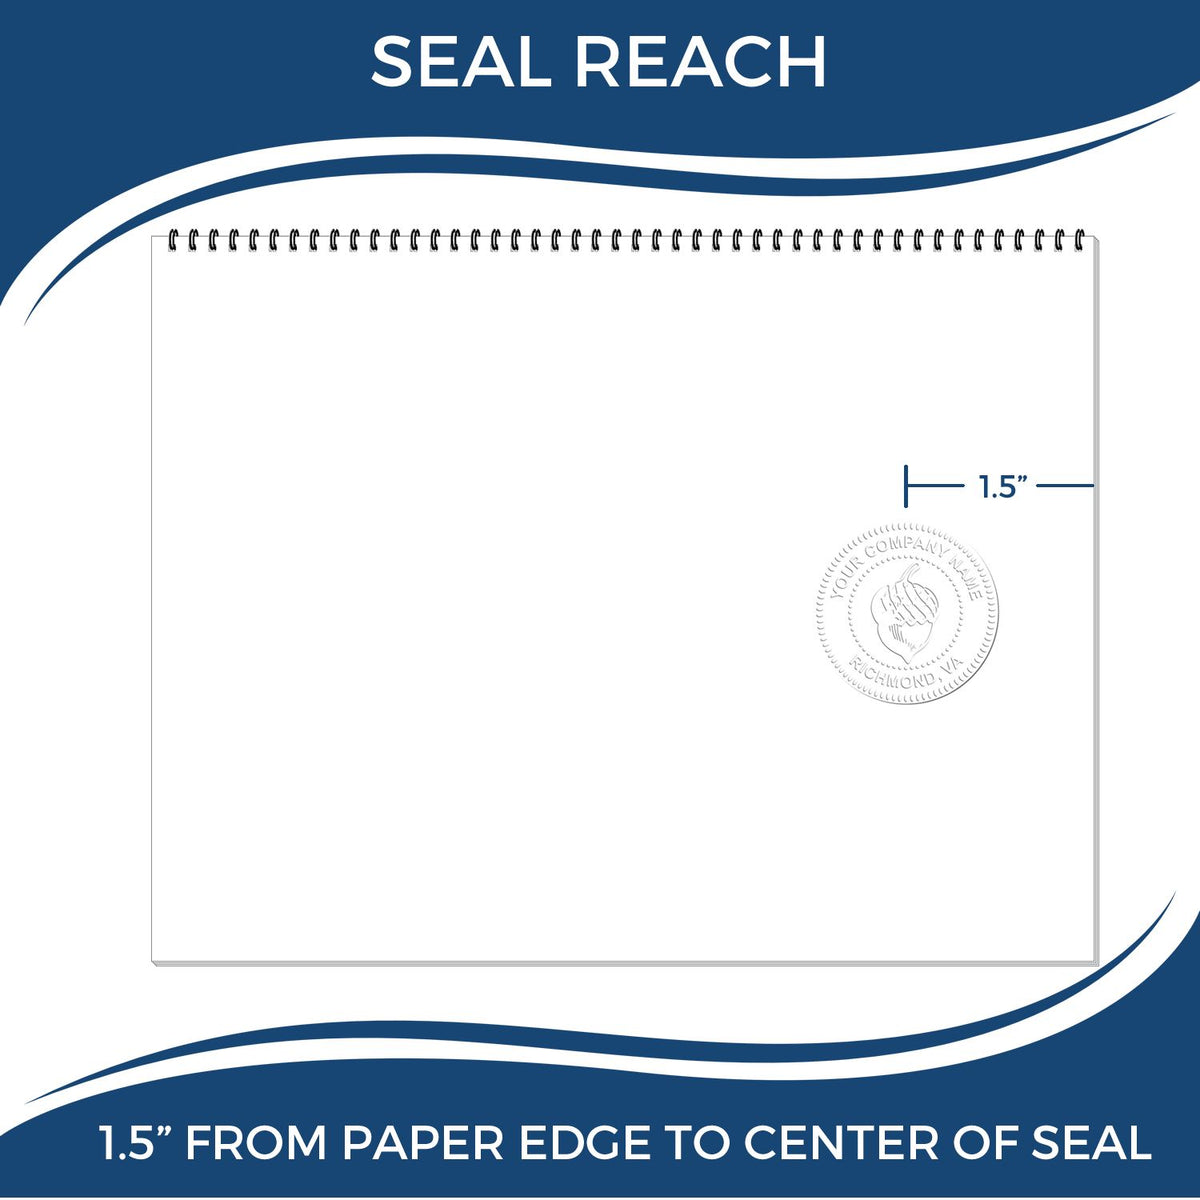 An infographic showing the seal reach which is represented by a ruler and a miniature seal image of the Soft Virginia Professional Geologist Seal